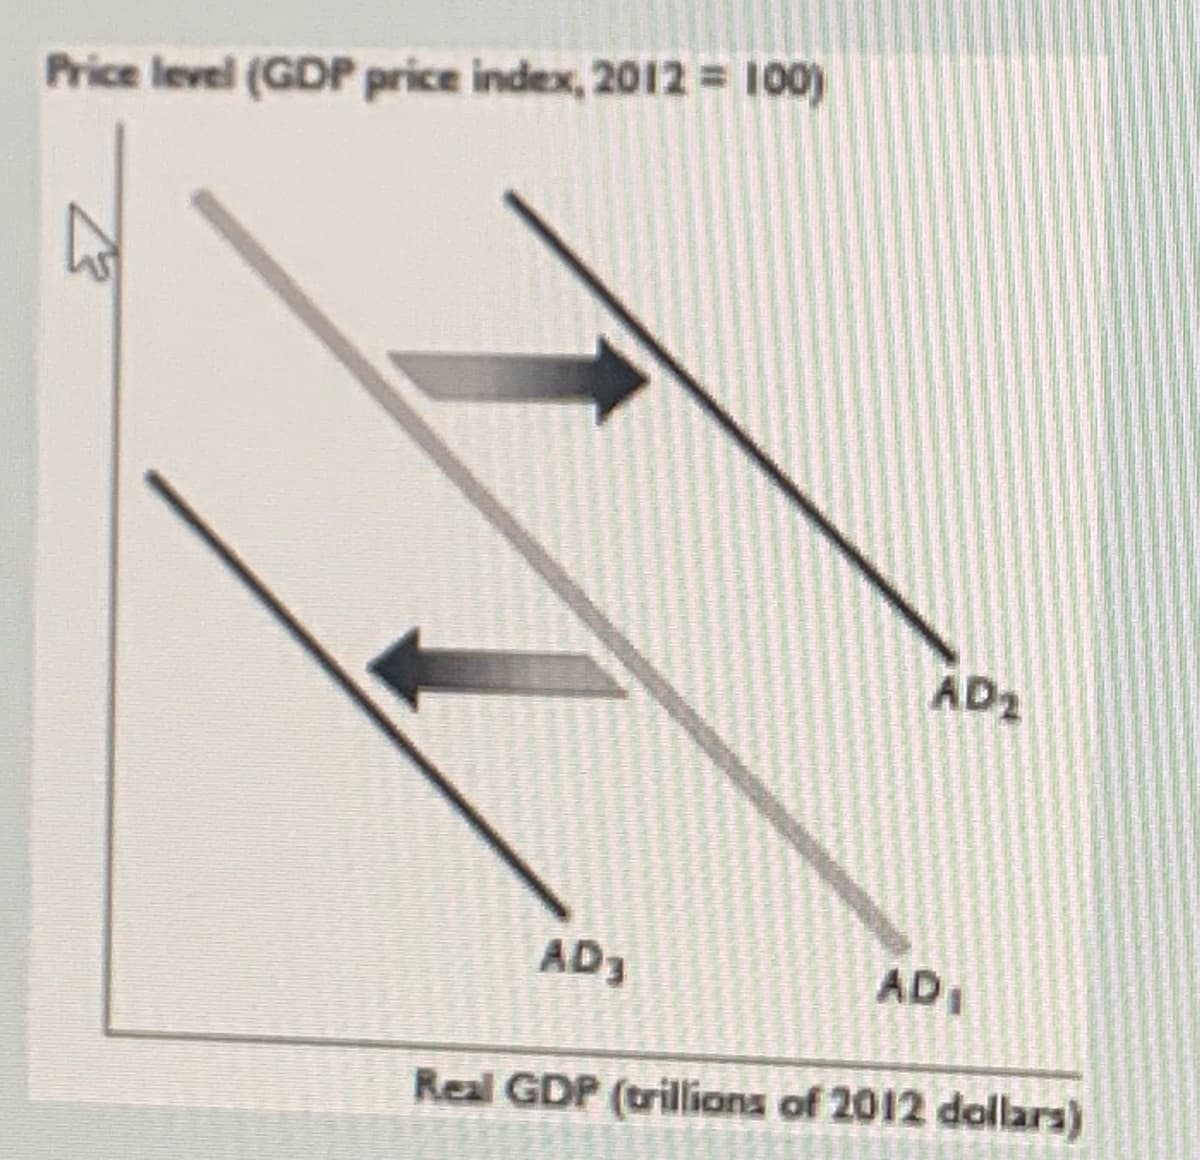 Price level (GDP price index, 2012 = 100)
AD2
AD3
AD
Real GDP (trillions of 2012 dollars)
